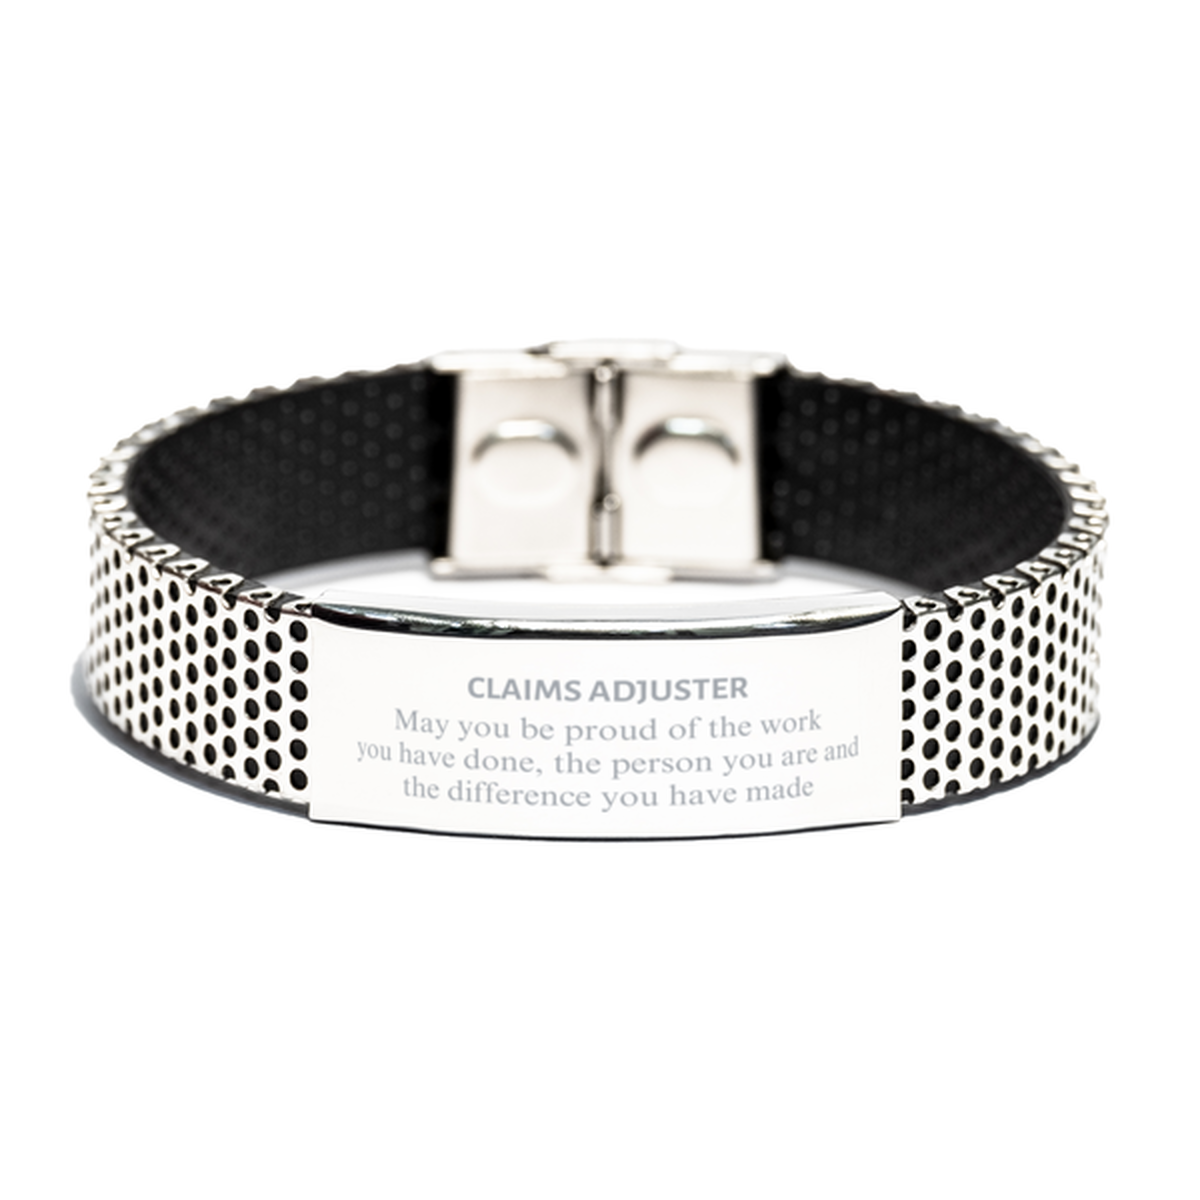 Claims Adjuster May you be proud of the work you have done, Retirement Claims Adjuster Stainless Steel Bracelet for Colleague Appreciation Gifts Amazing for Claims Adjuster